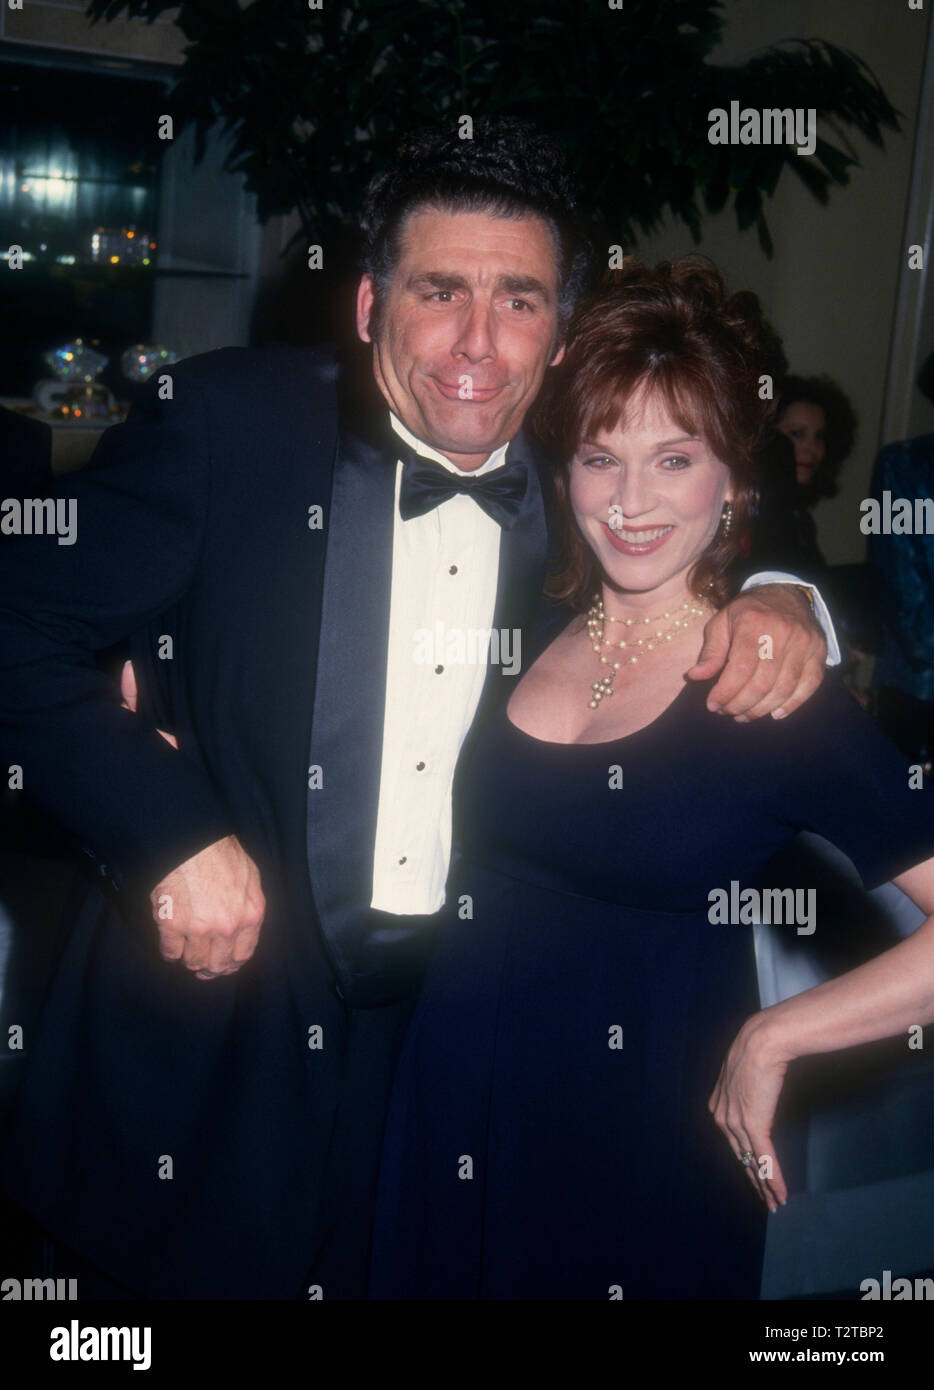 BEVERLY HILLS, CA - MARCH 13: Actor Michael Richards and actress Marilu Henner attends the 46th Annual Writers Guild of America Awards on March 13, 1994 at the Beverly Hilton Hotel in Beverly Hills, California. Photo by Barry King/Alamy Stock Photo Stock Photo